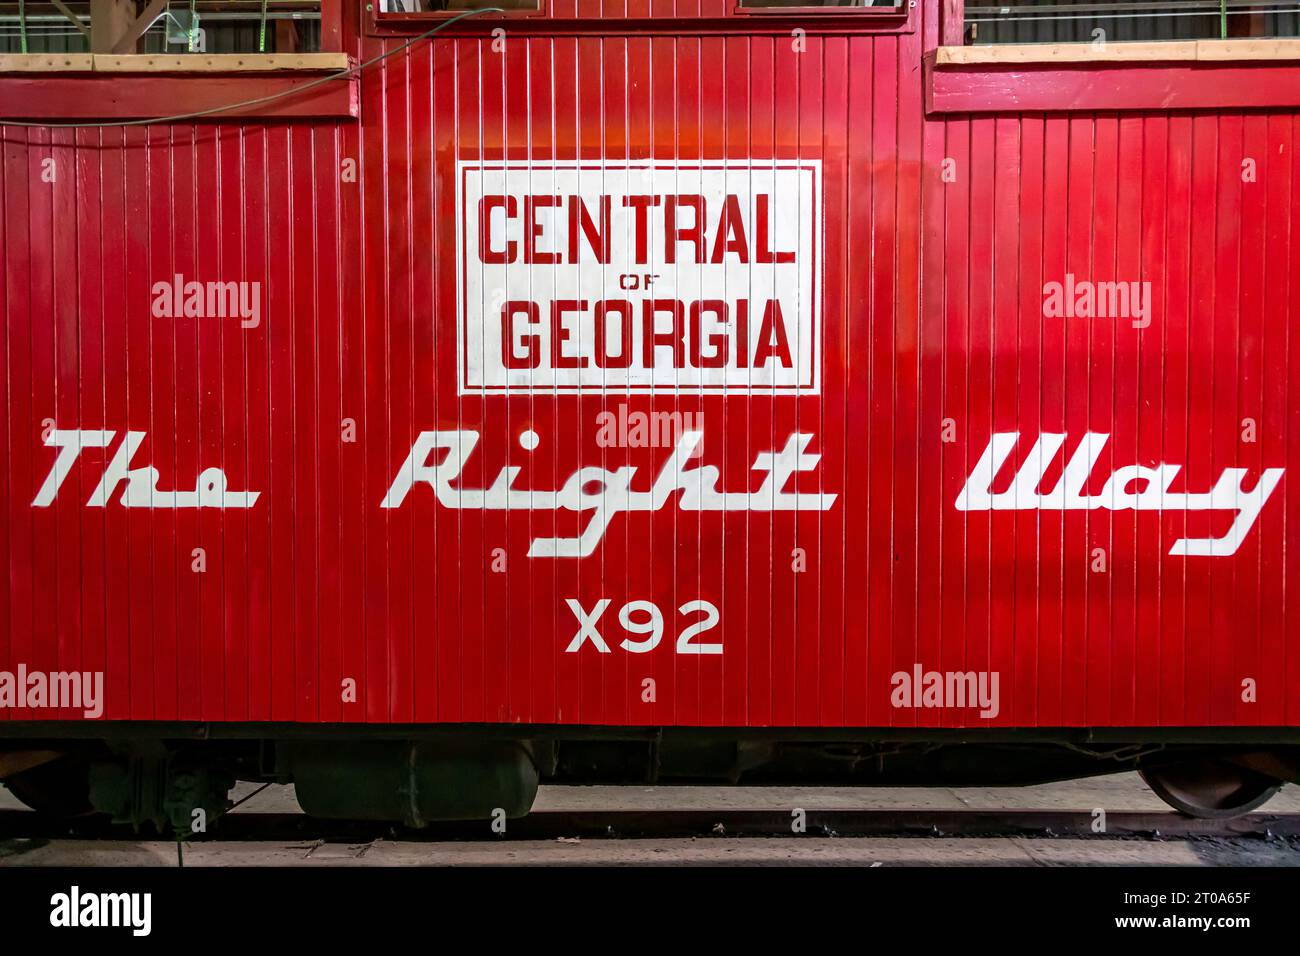 Caboose Central of Georgia Banque D'Images